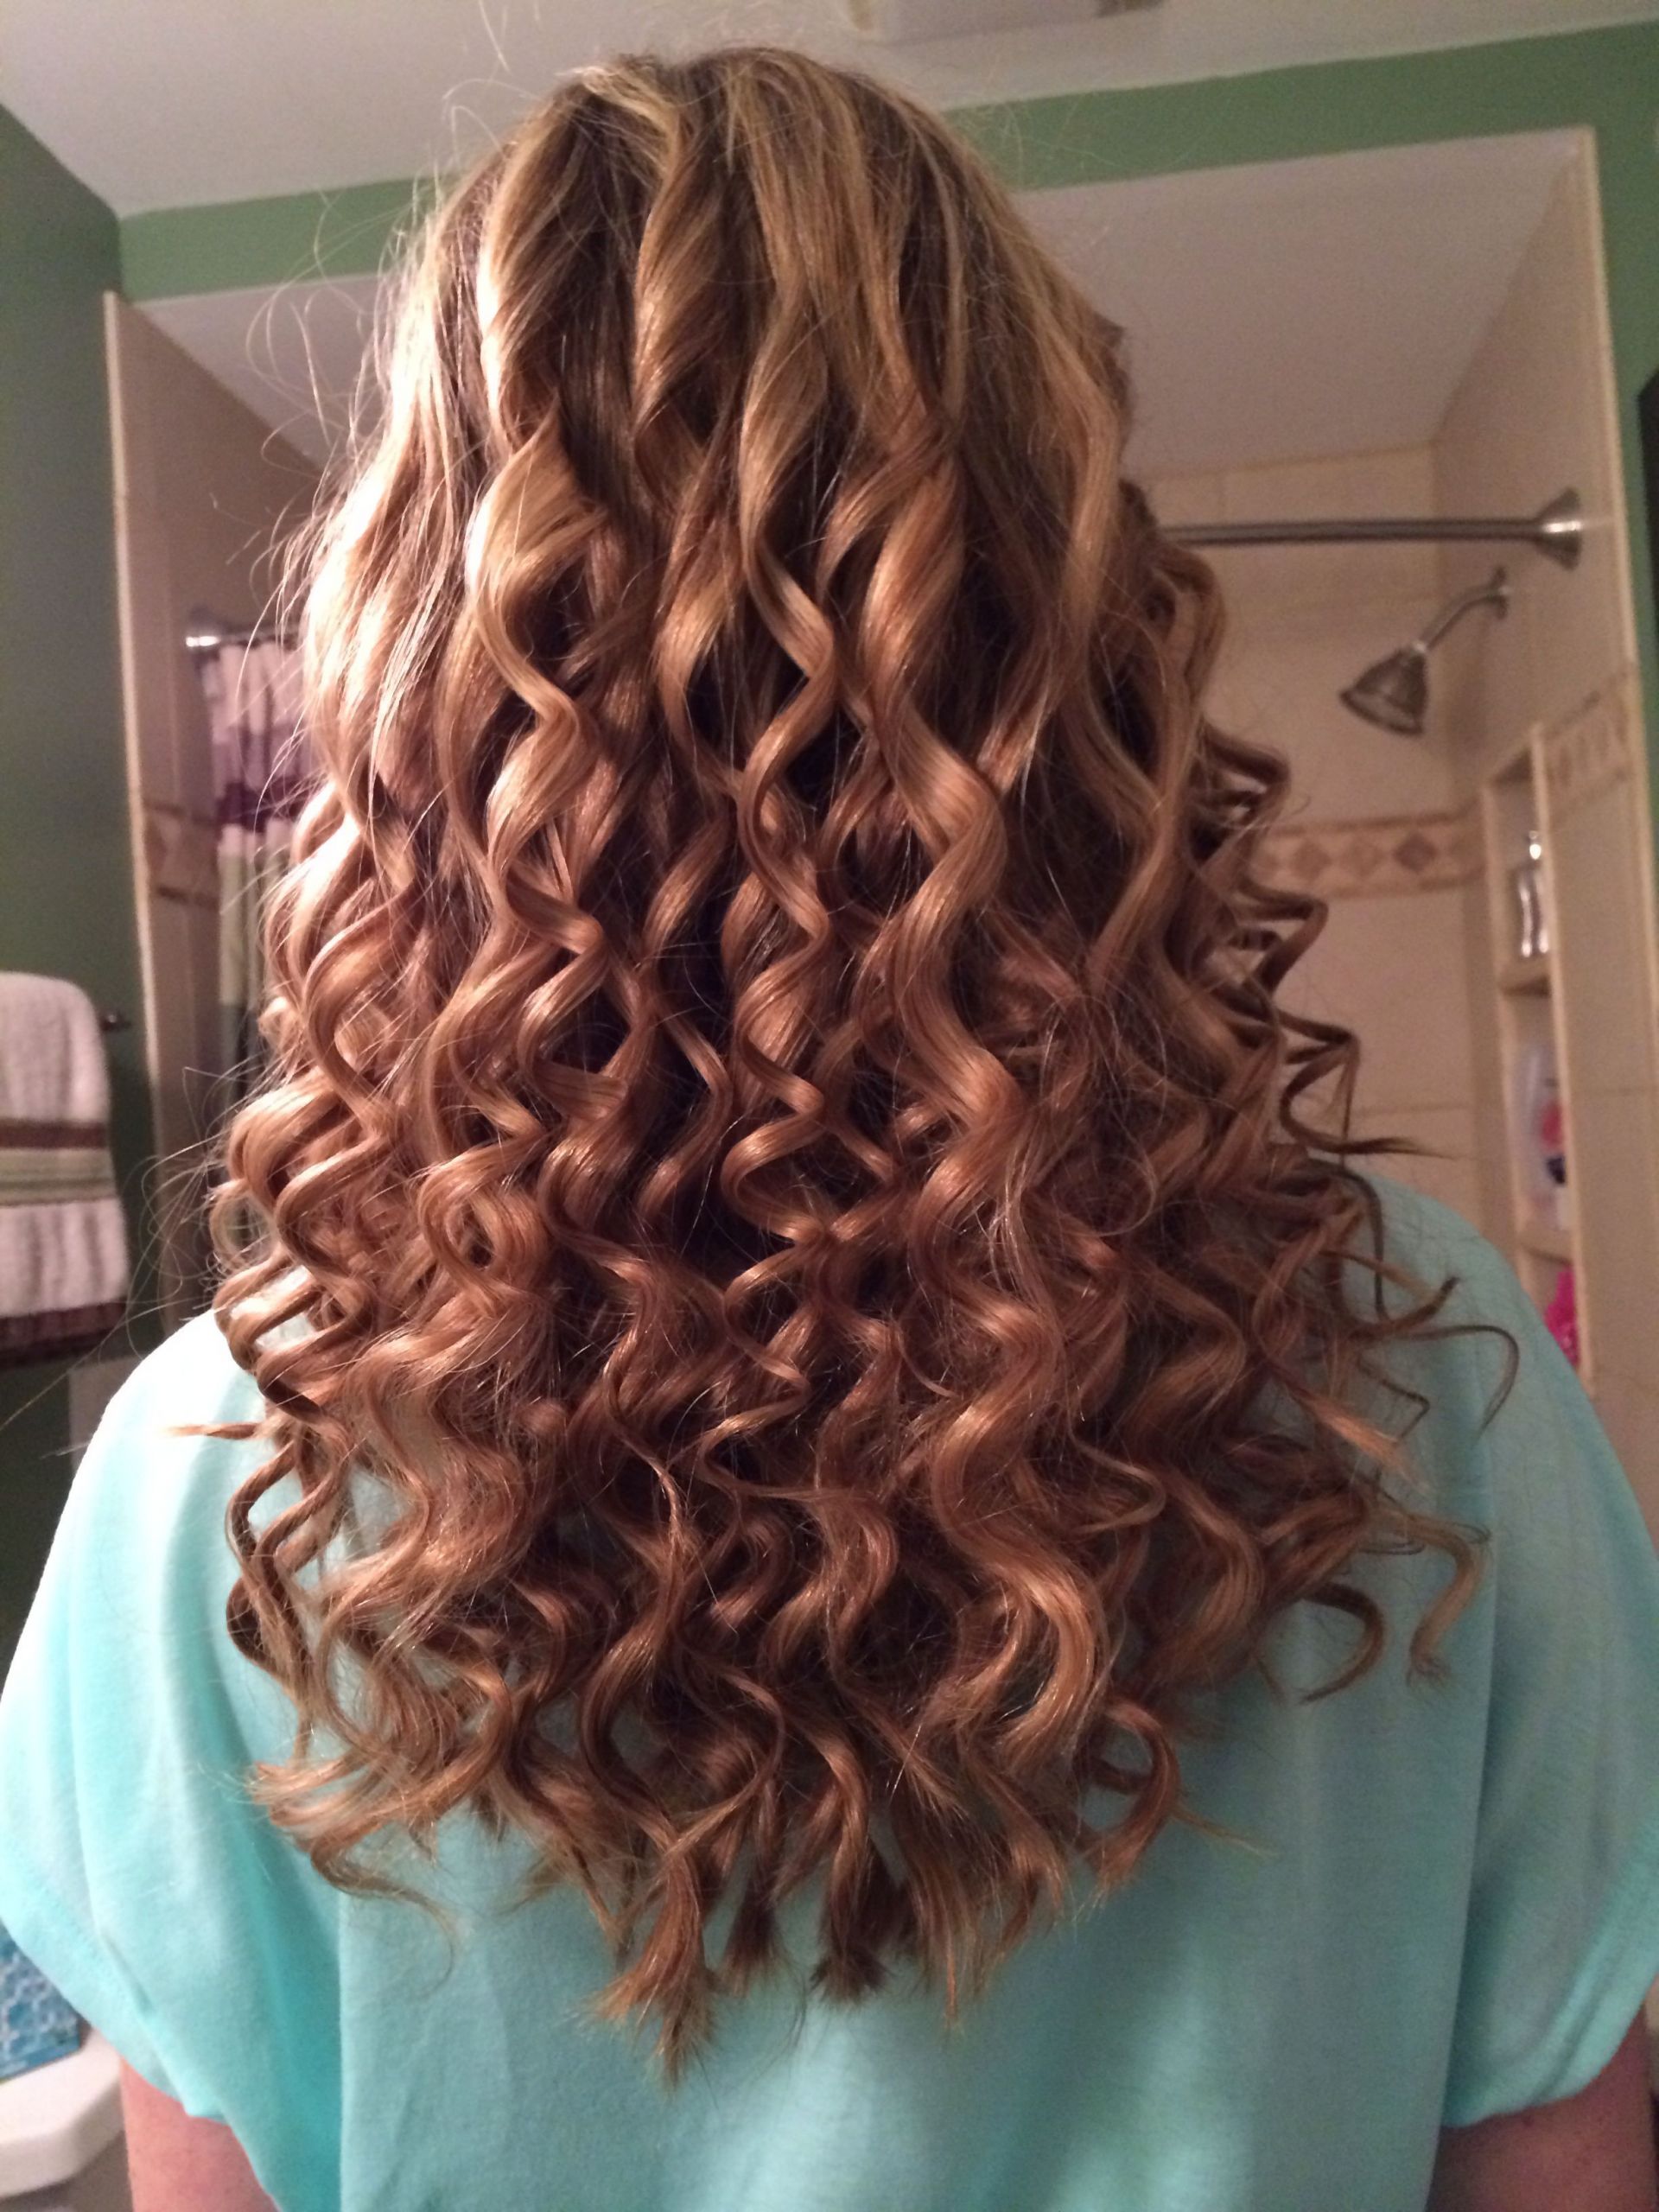 Short Spiral Curly Hairstyles
 My hair yesterday Tight spiral curls